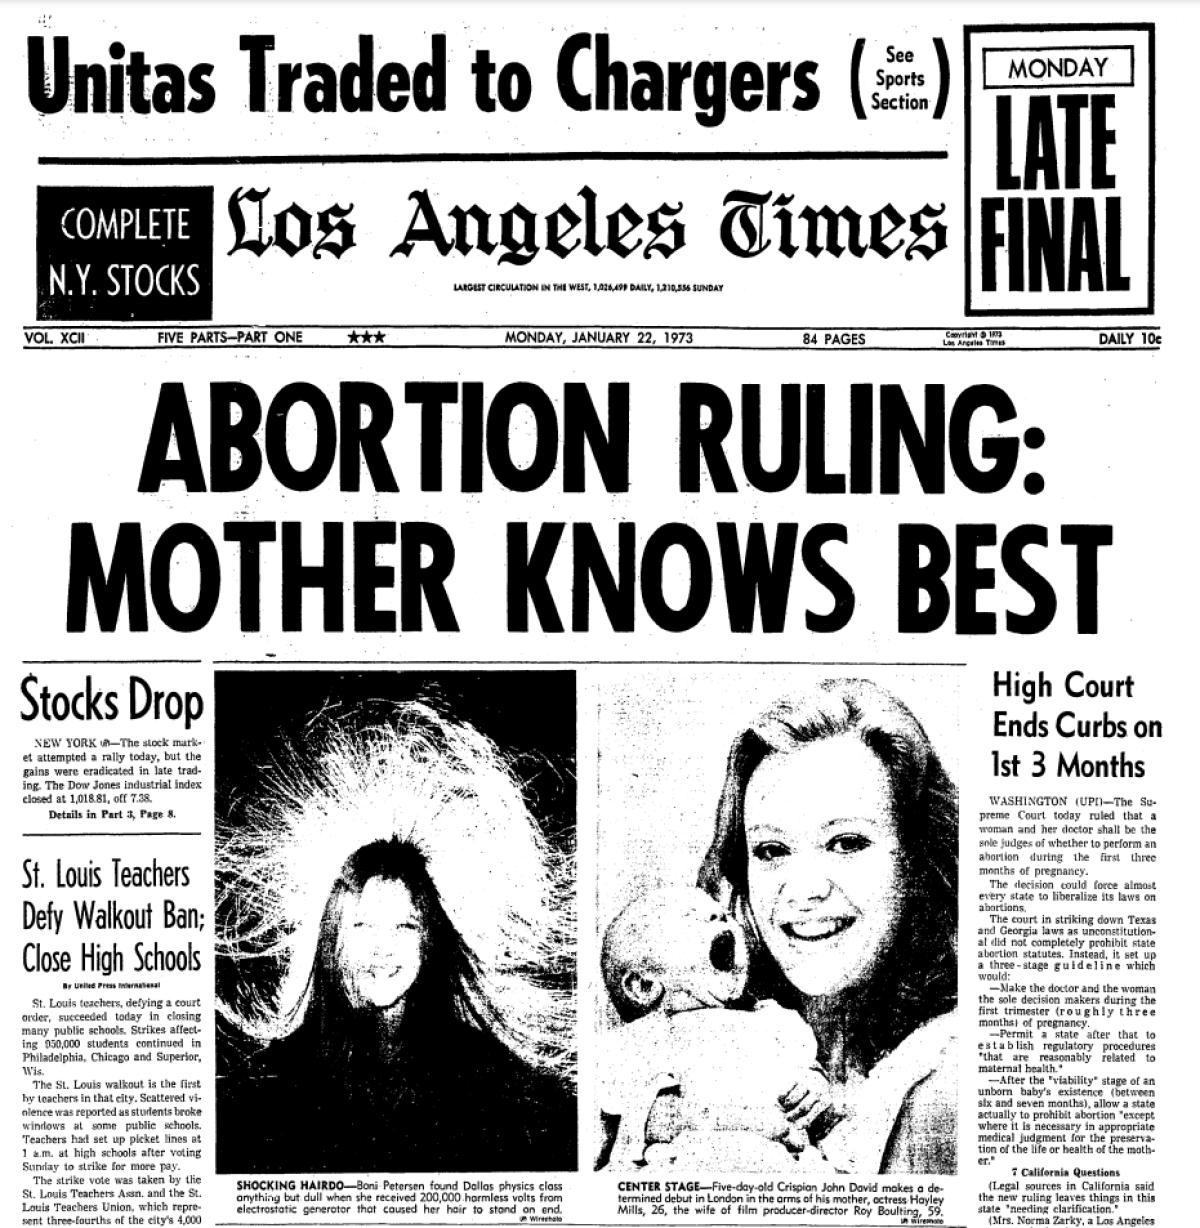 Front page of L.A. Times with headline: "Abortion Ruling: Mother Knows Best: